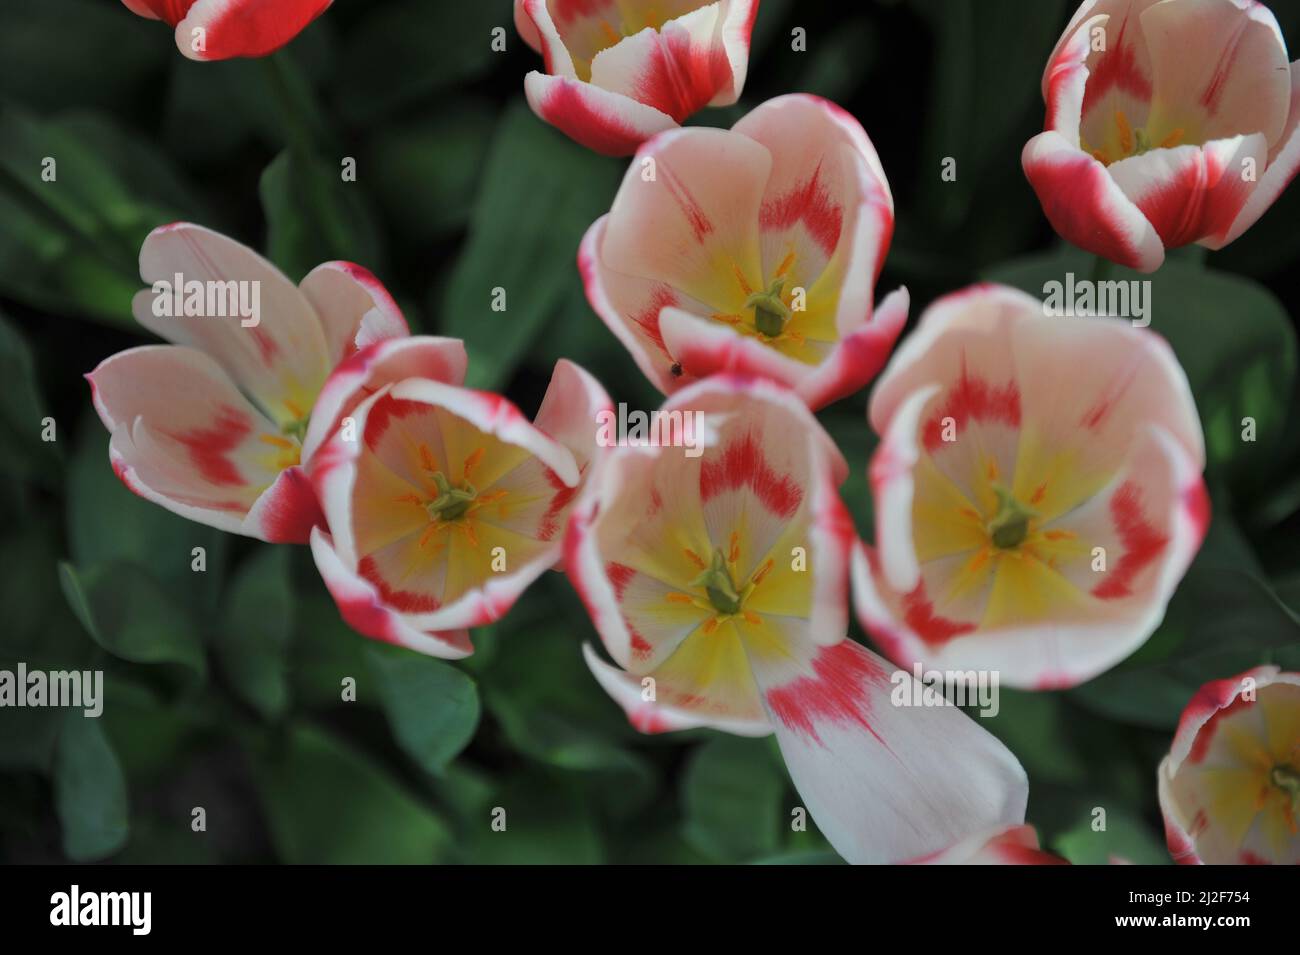 Red and white Darwin Hybrid tulips (Tulipa) Candy Apple Delight bloom in a garden in March Stock Photo